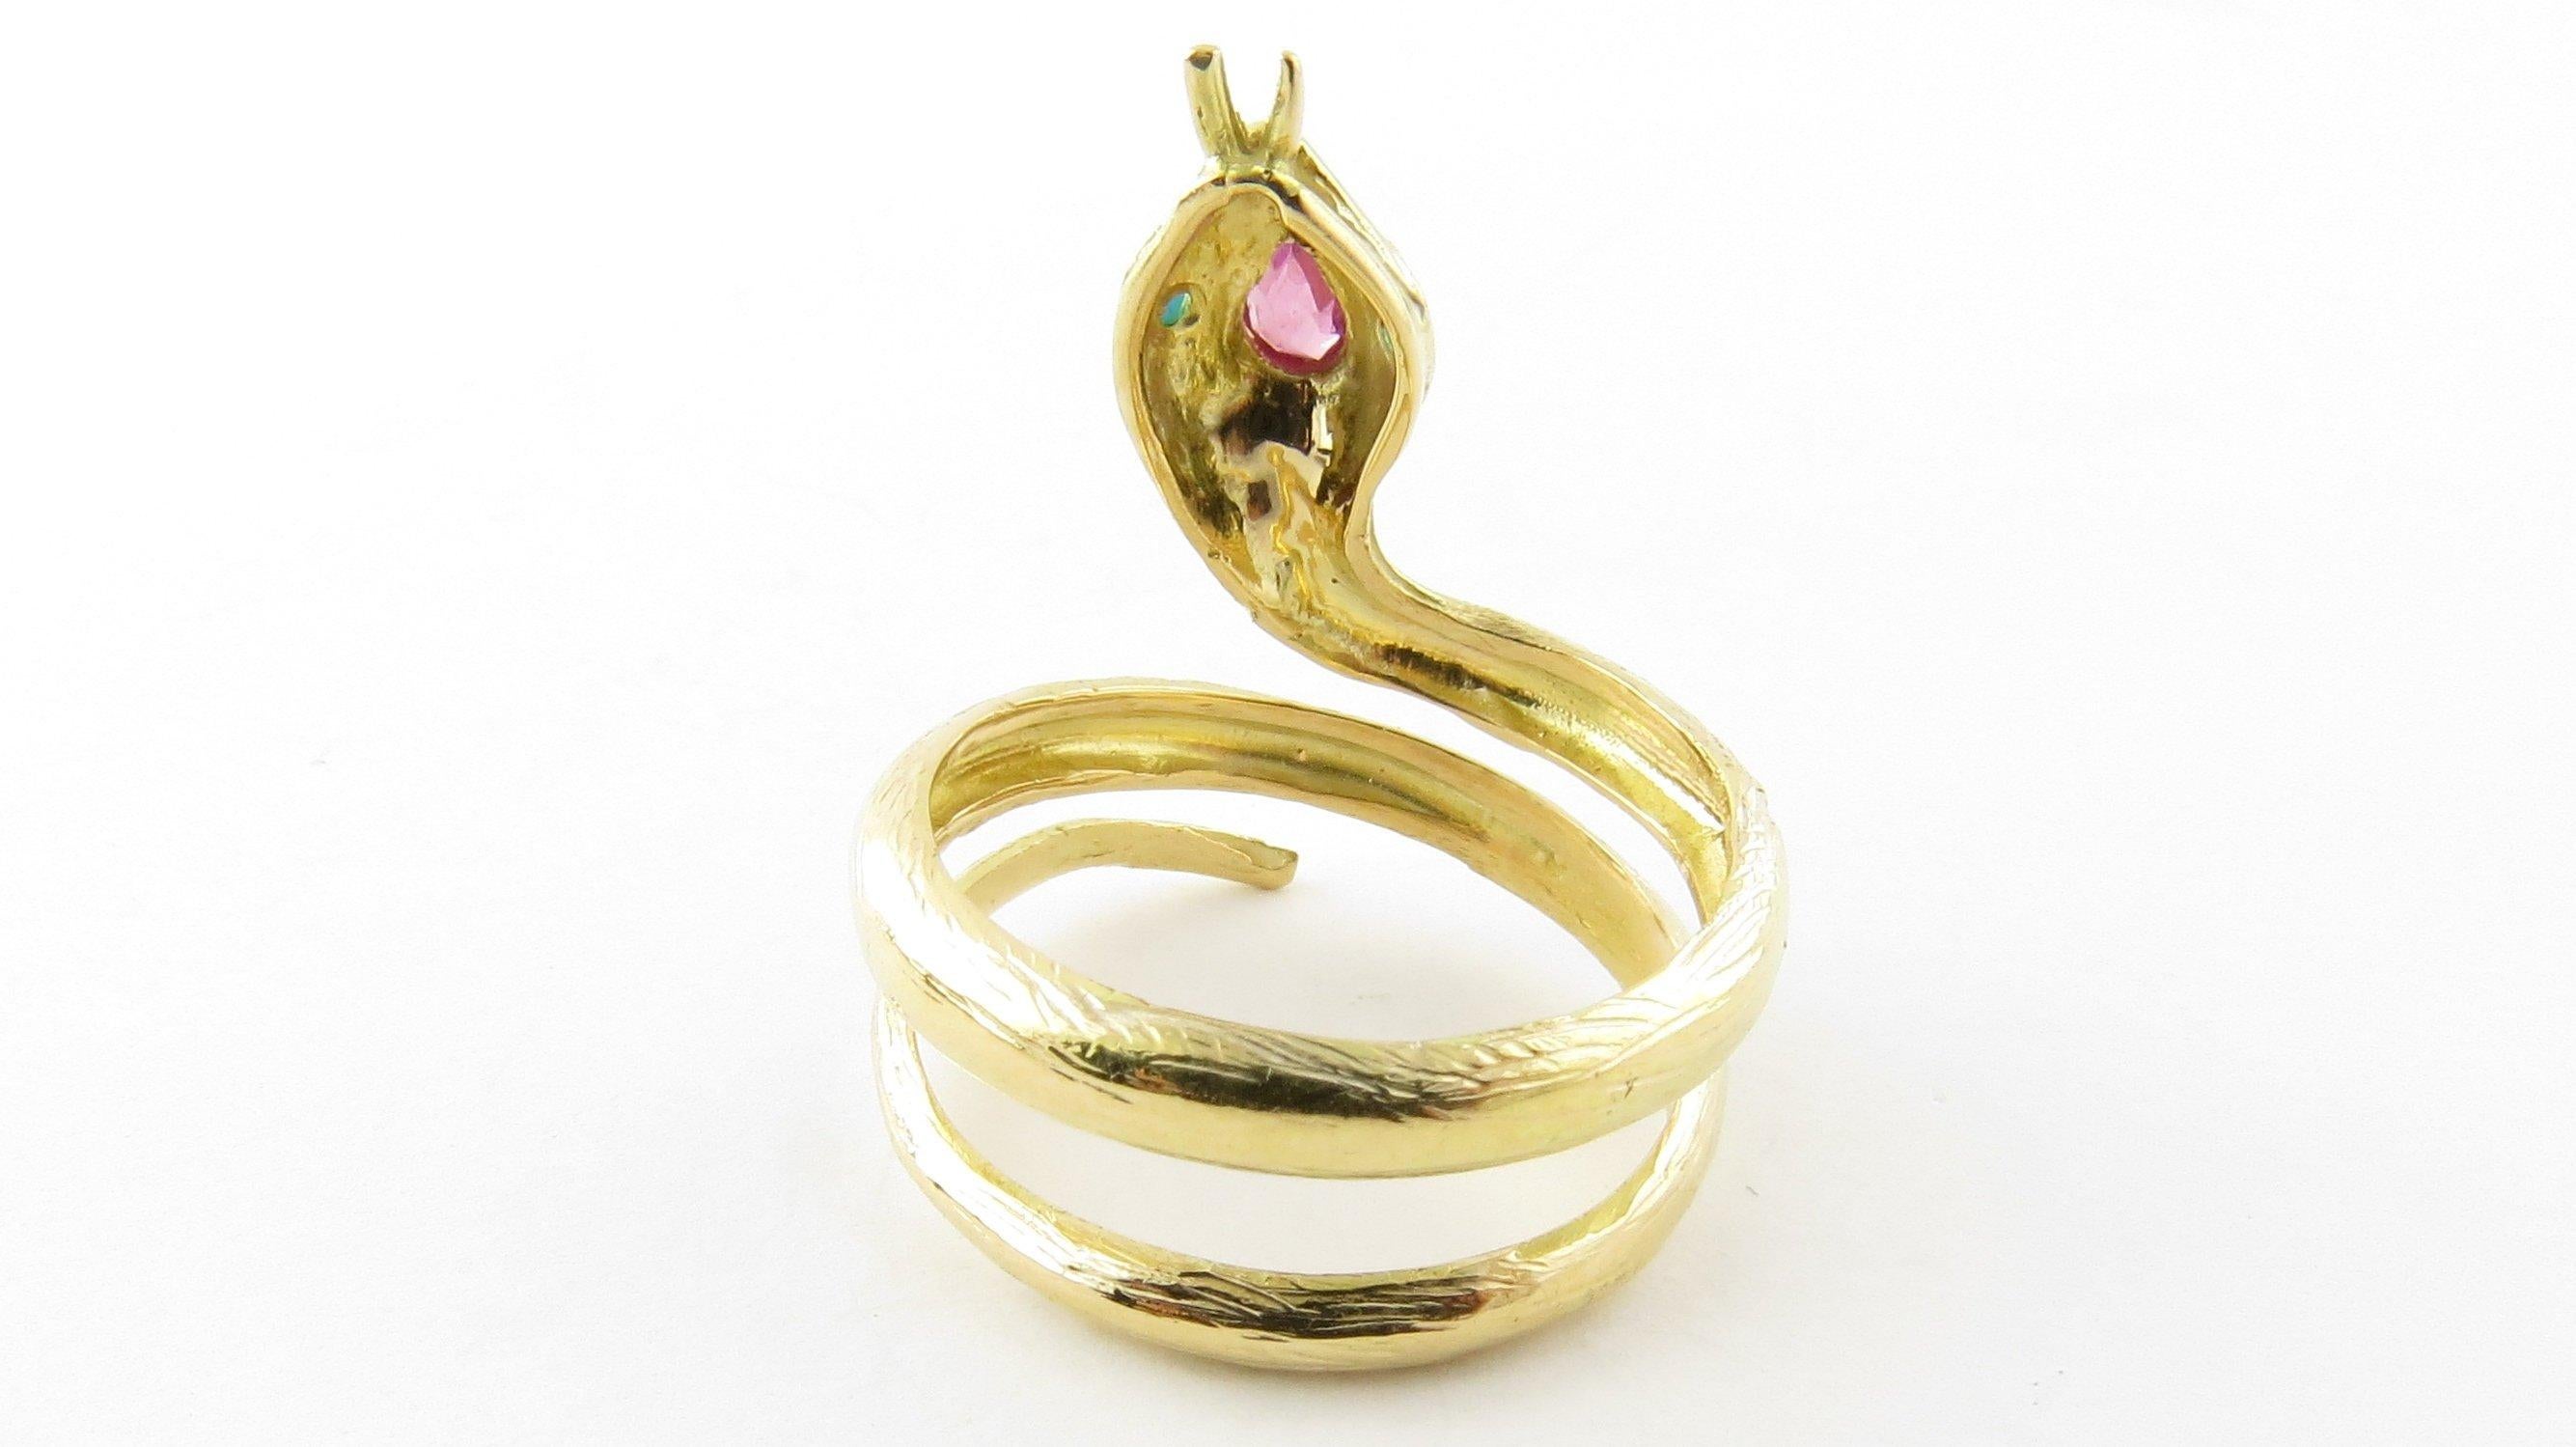 Vintage 18 Karat Yellow Gold Ruby and Turquoise Snake Ring Size 7.25- This lovely snake ring is detailed with one genuine ruby and two round turquoise stone set in beautifully detailed 18K yellow gold. Front of ring measures 25 mm. Shank measures 8